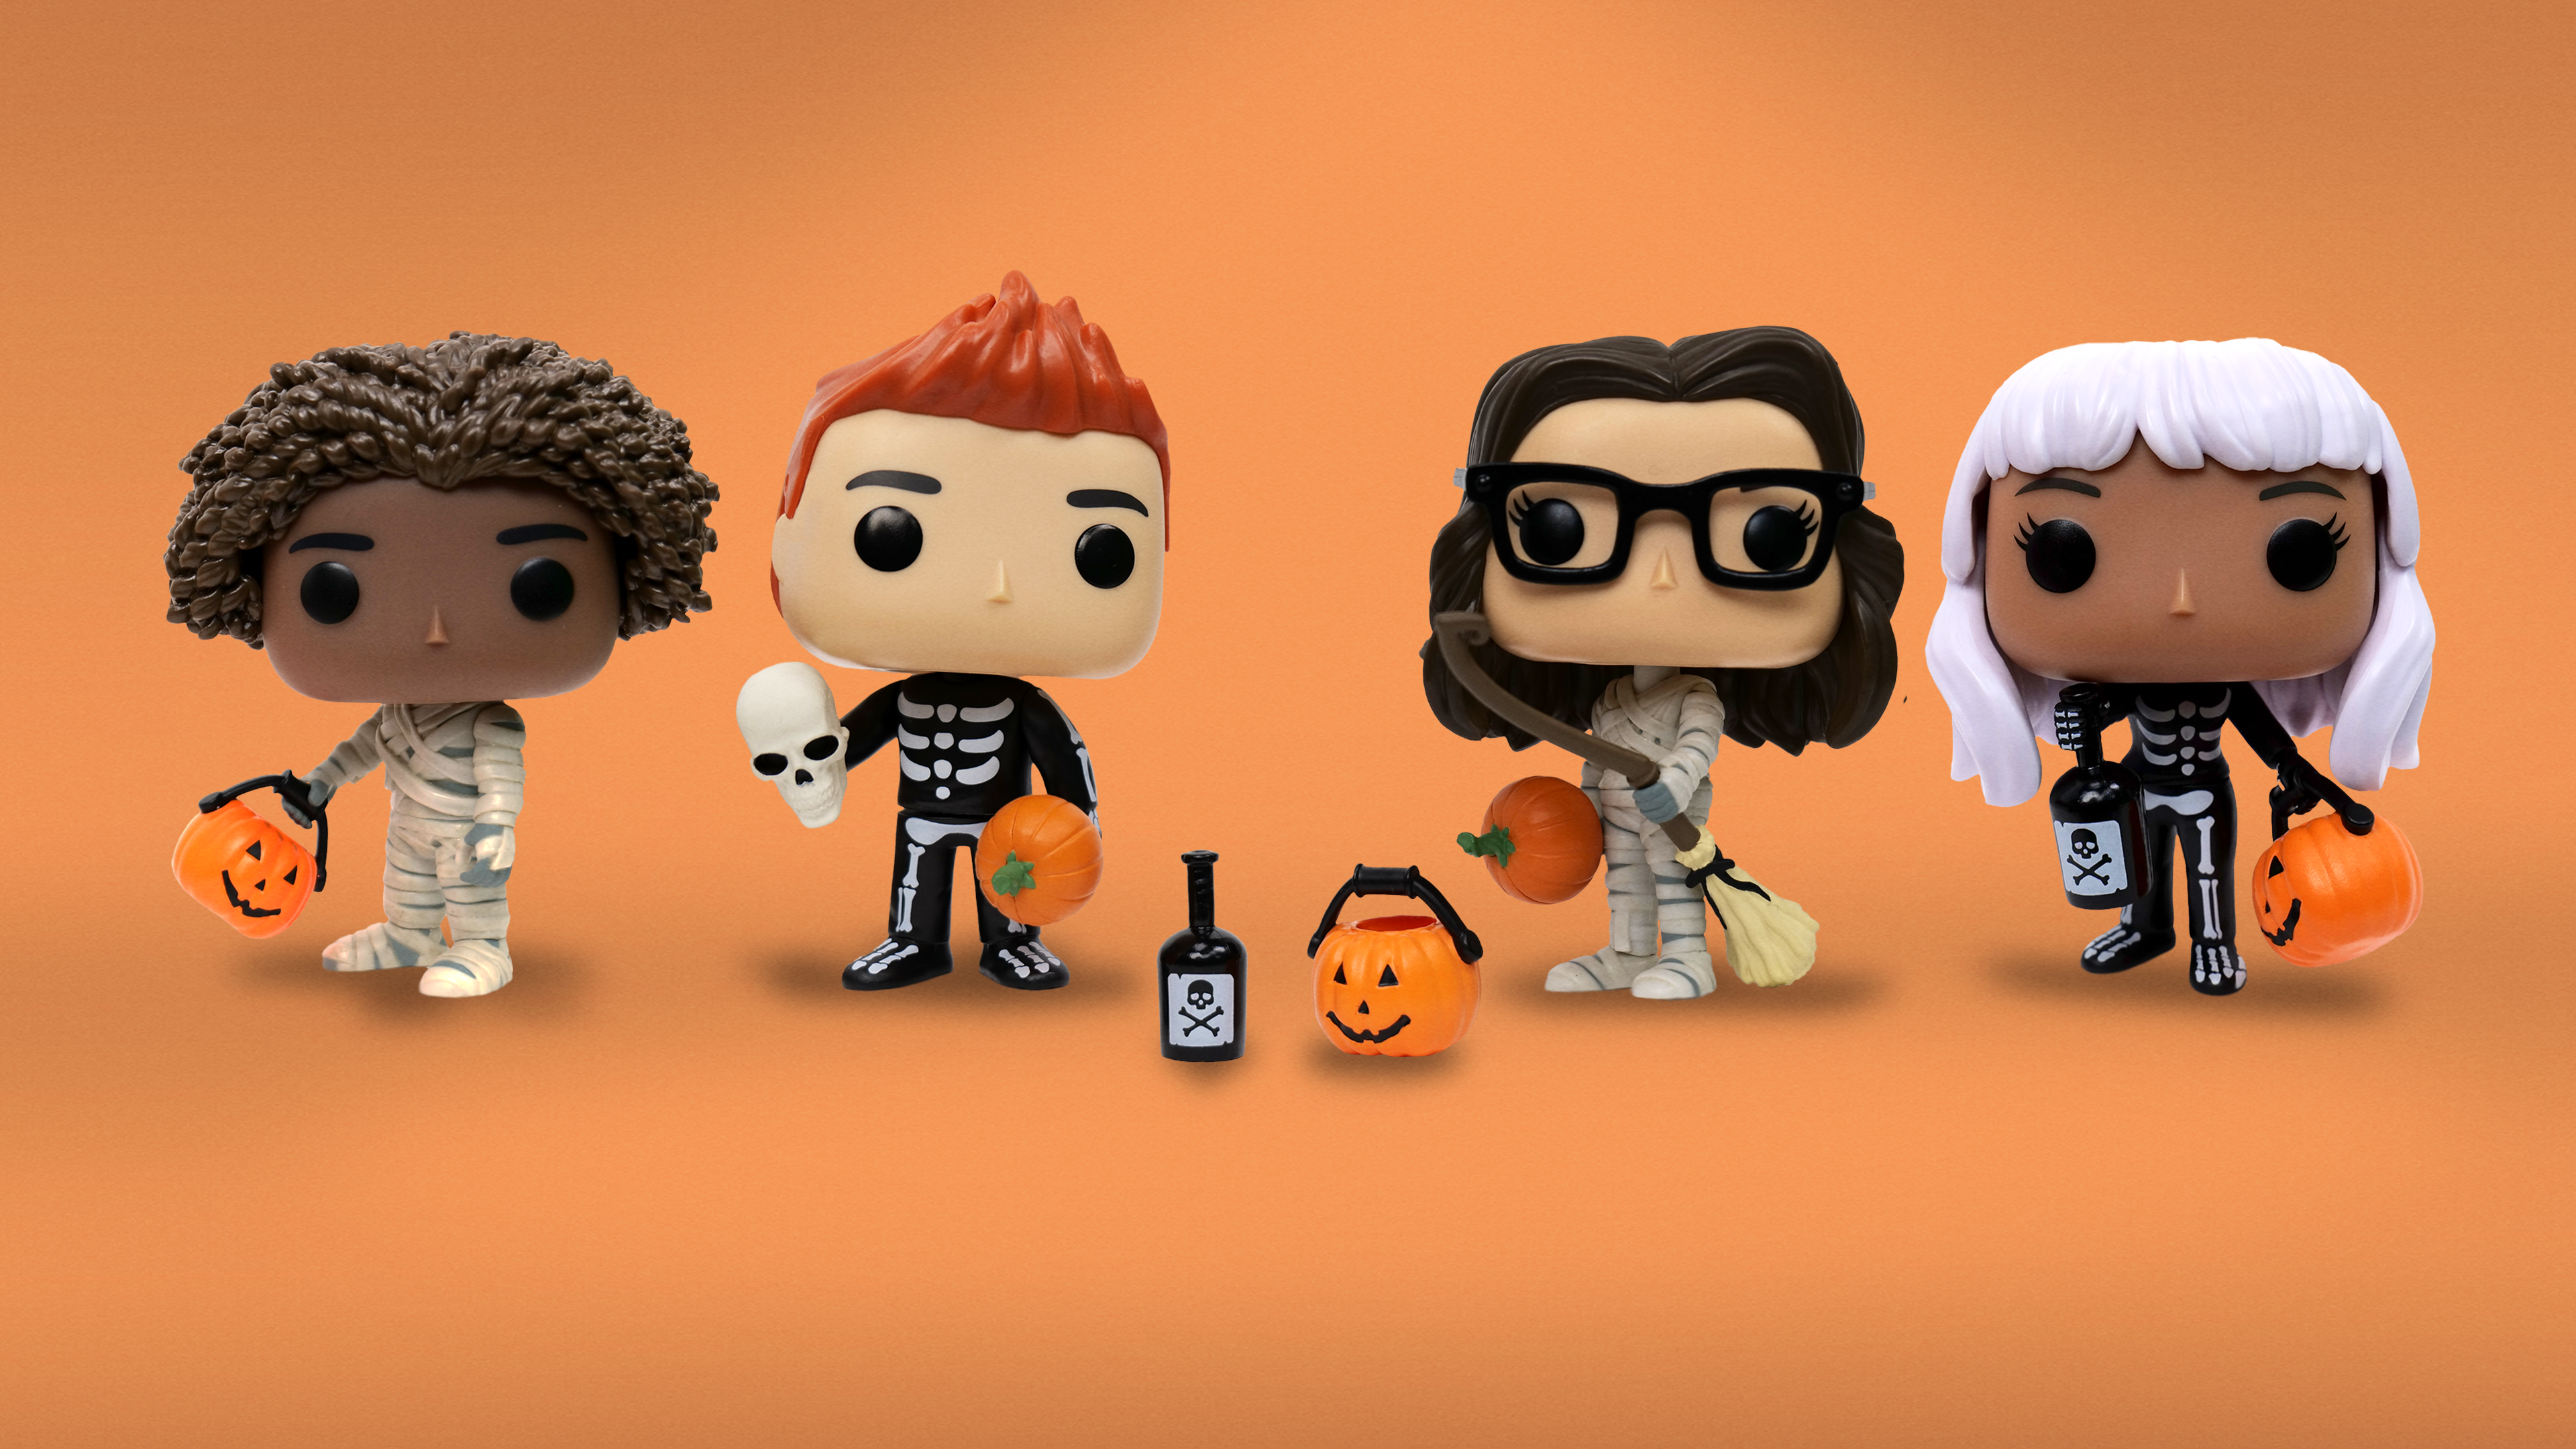 Four custom Pop! Yourself figures showcase the new seasonal, Halloween costumes and accessories including trick-or-treat buckets, pumpkins, poison bottles, straw broomstick, and skull.